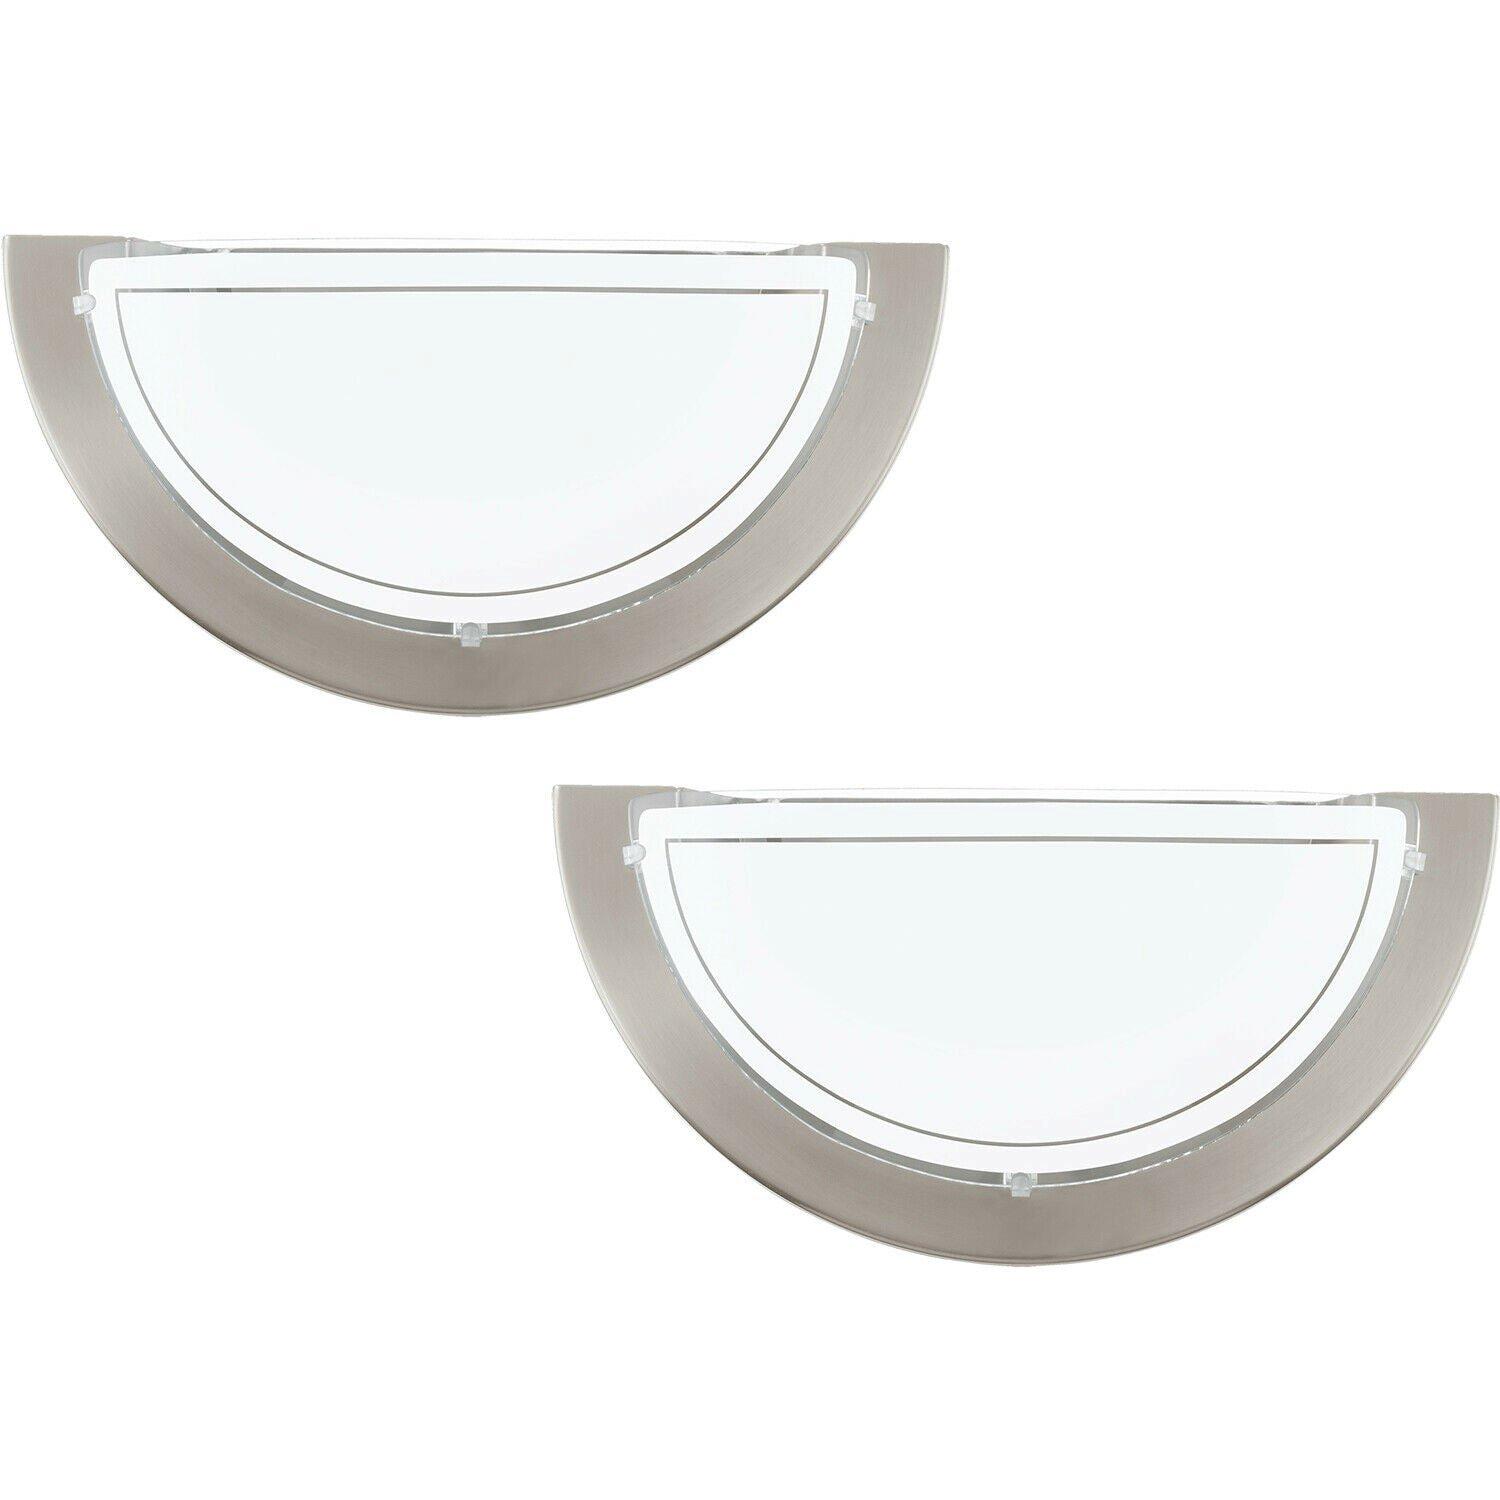 2 PACK Wall Light Colour Satin Nickel Shade White Clear Glass Painted E27 1x60W